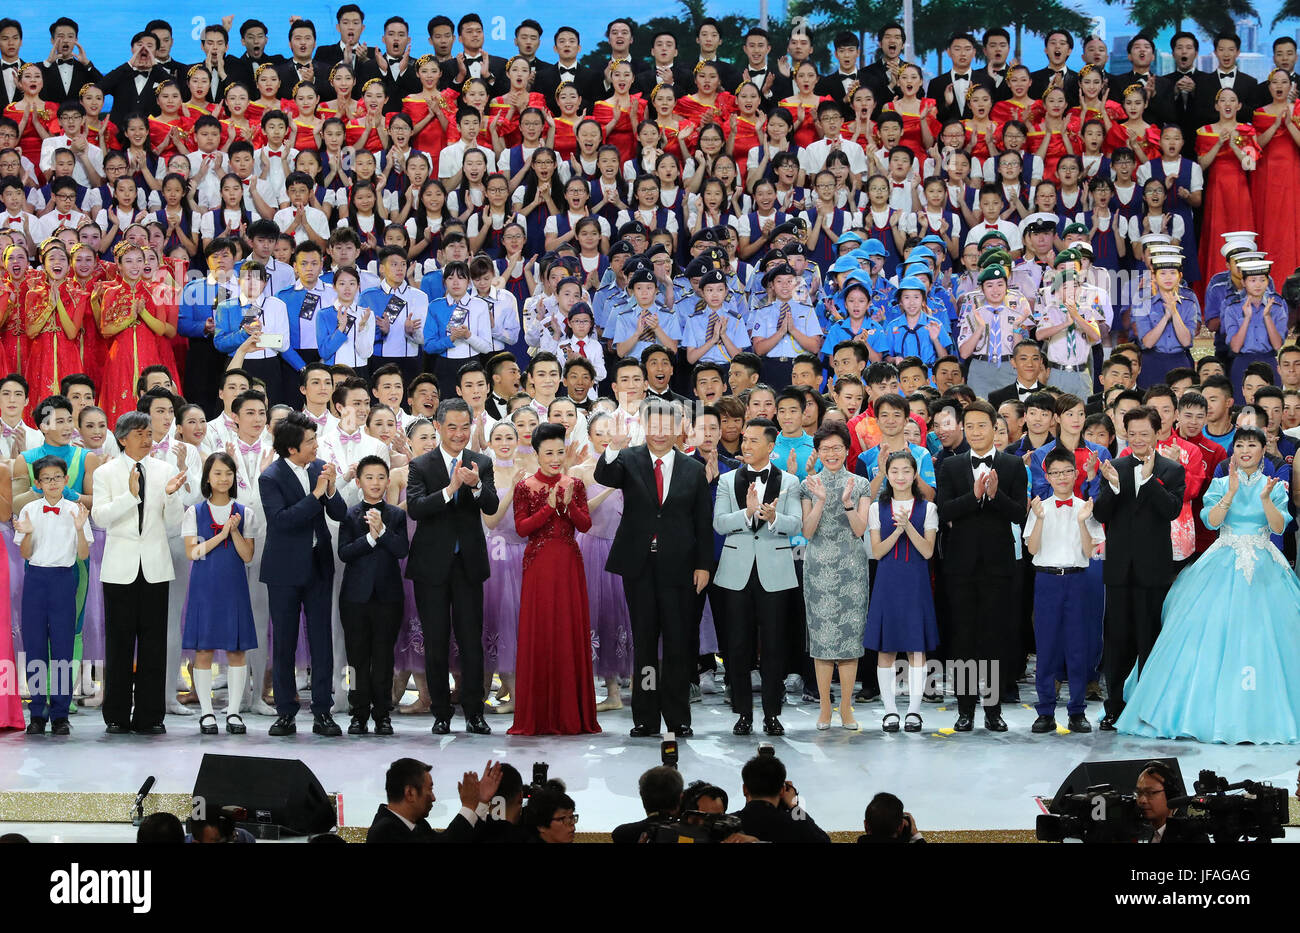 (170630) -- HONG KONG, June 30, 2017 (Xinhua) -- Chinese President Xi Jinping (C, front), also general secretary of the Central Committee of the Communist Party of China and chairman of the Central Military Commission, steps onto the stage and sings in chorus the song 'Ode to the Motherland' with the performers and the audience during a grand gala marking the 20th anniversary of Hong Kong's return to China at Hong Kong Convention and Exhibition Center, in Hong Kong, south China, June 30, 2017. (Xinhua/Ma Zhancheng) (ly) Stock Photo